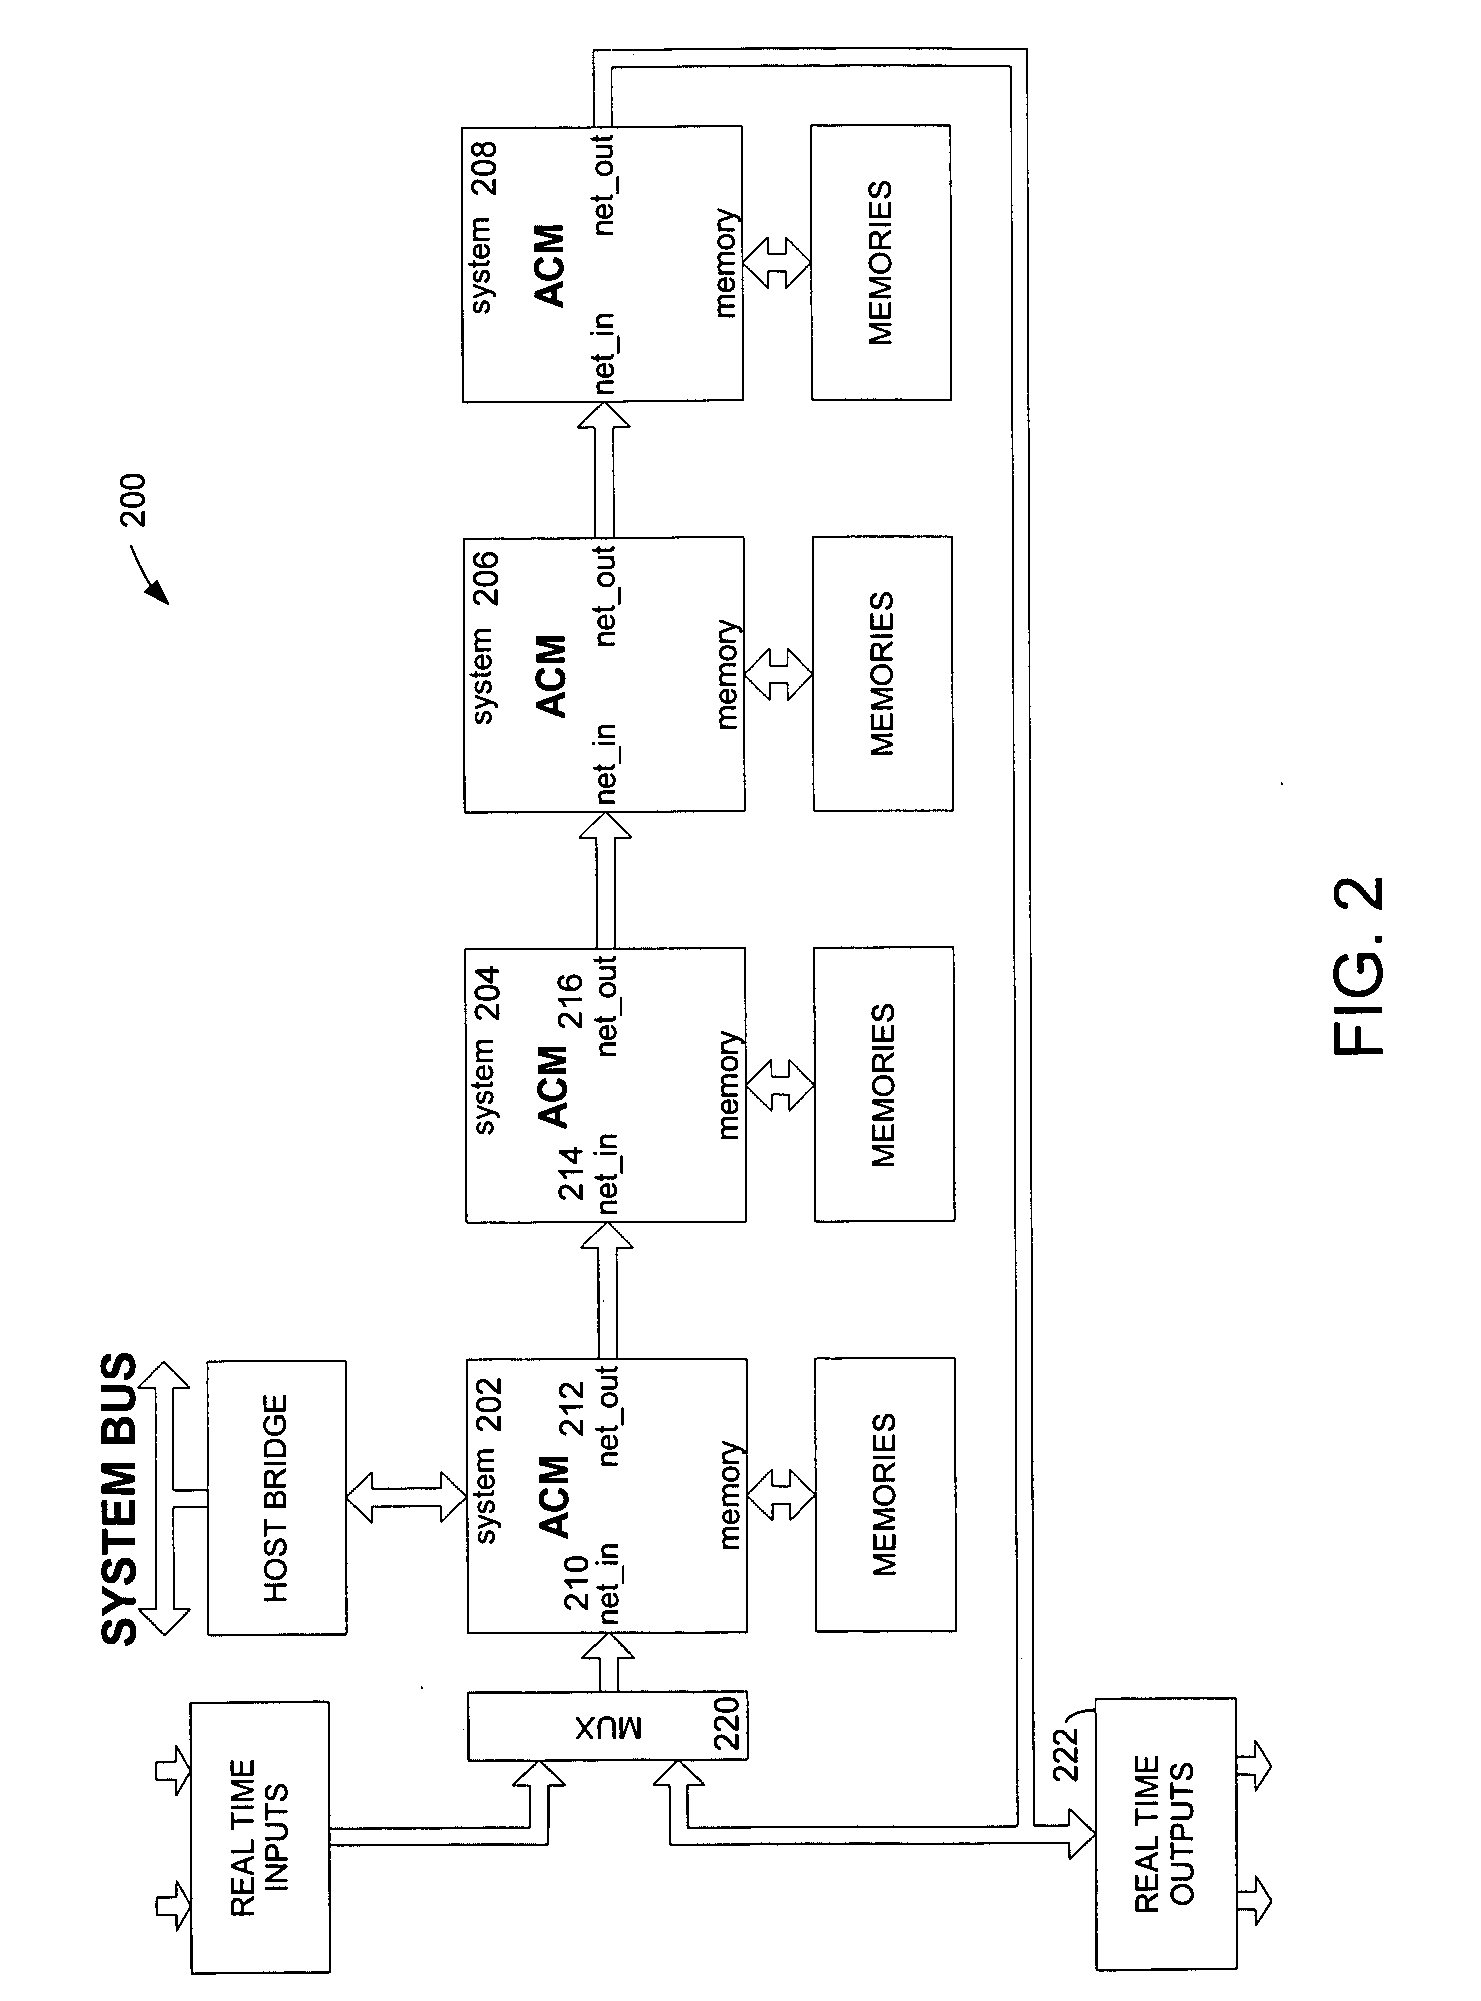 Arithmetic node including general digital signal processing functions for an adaptive computing machine